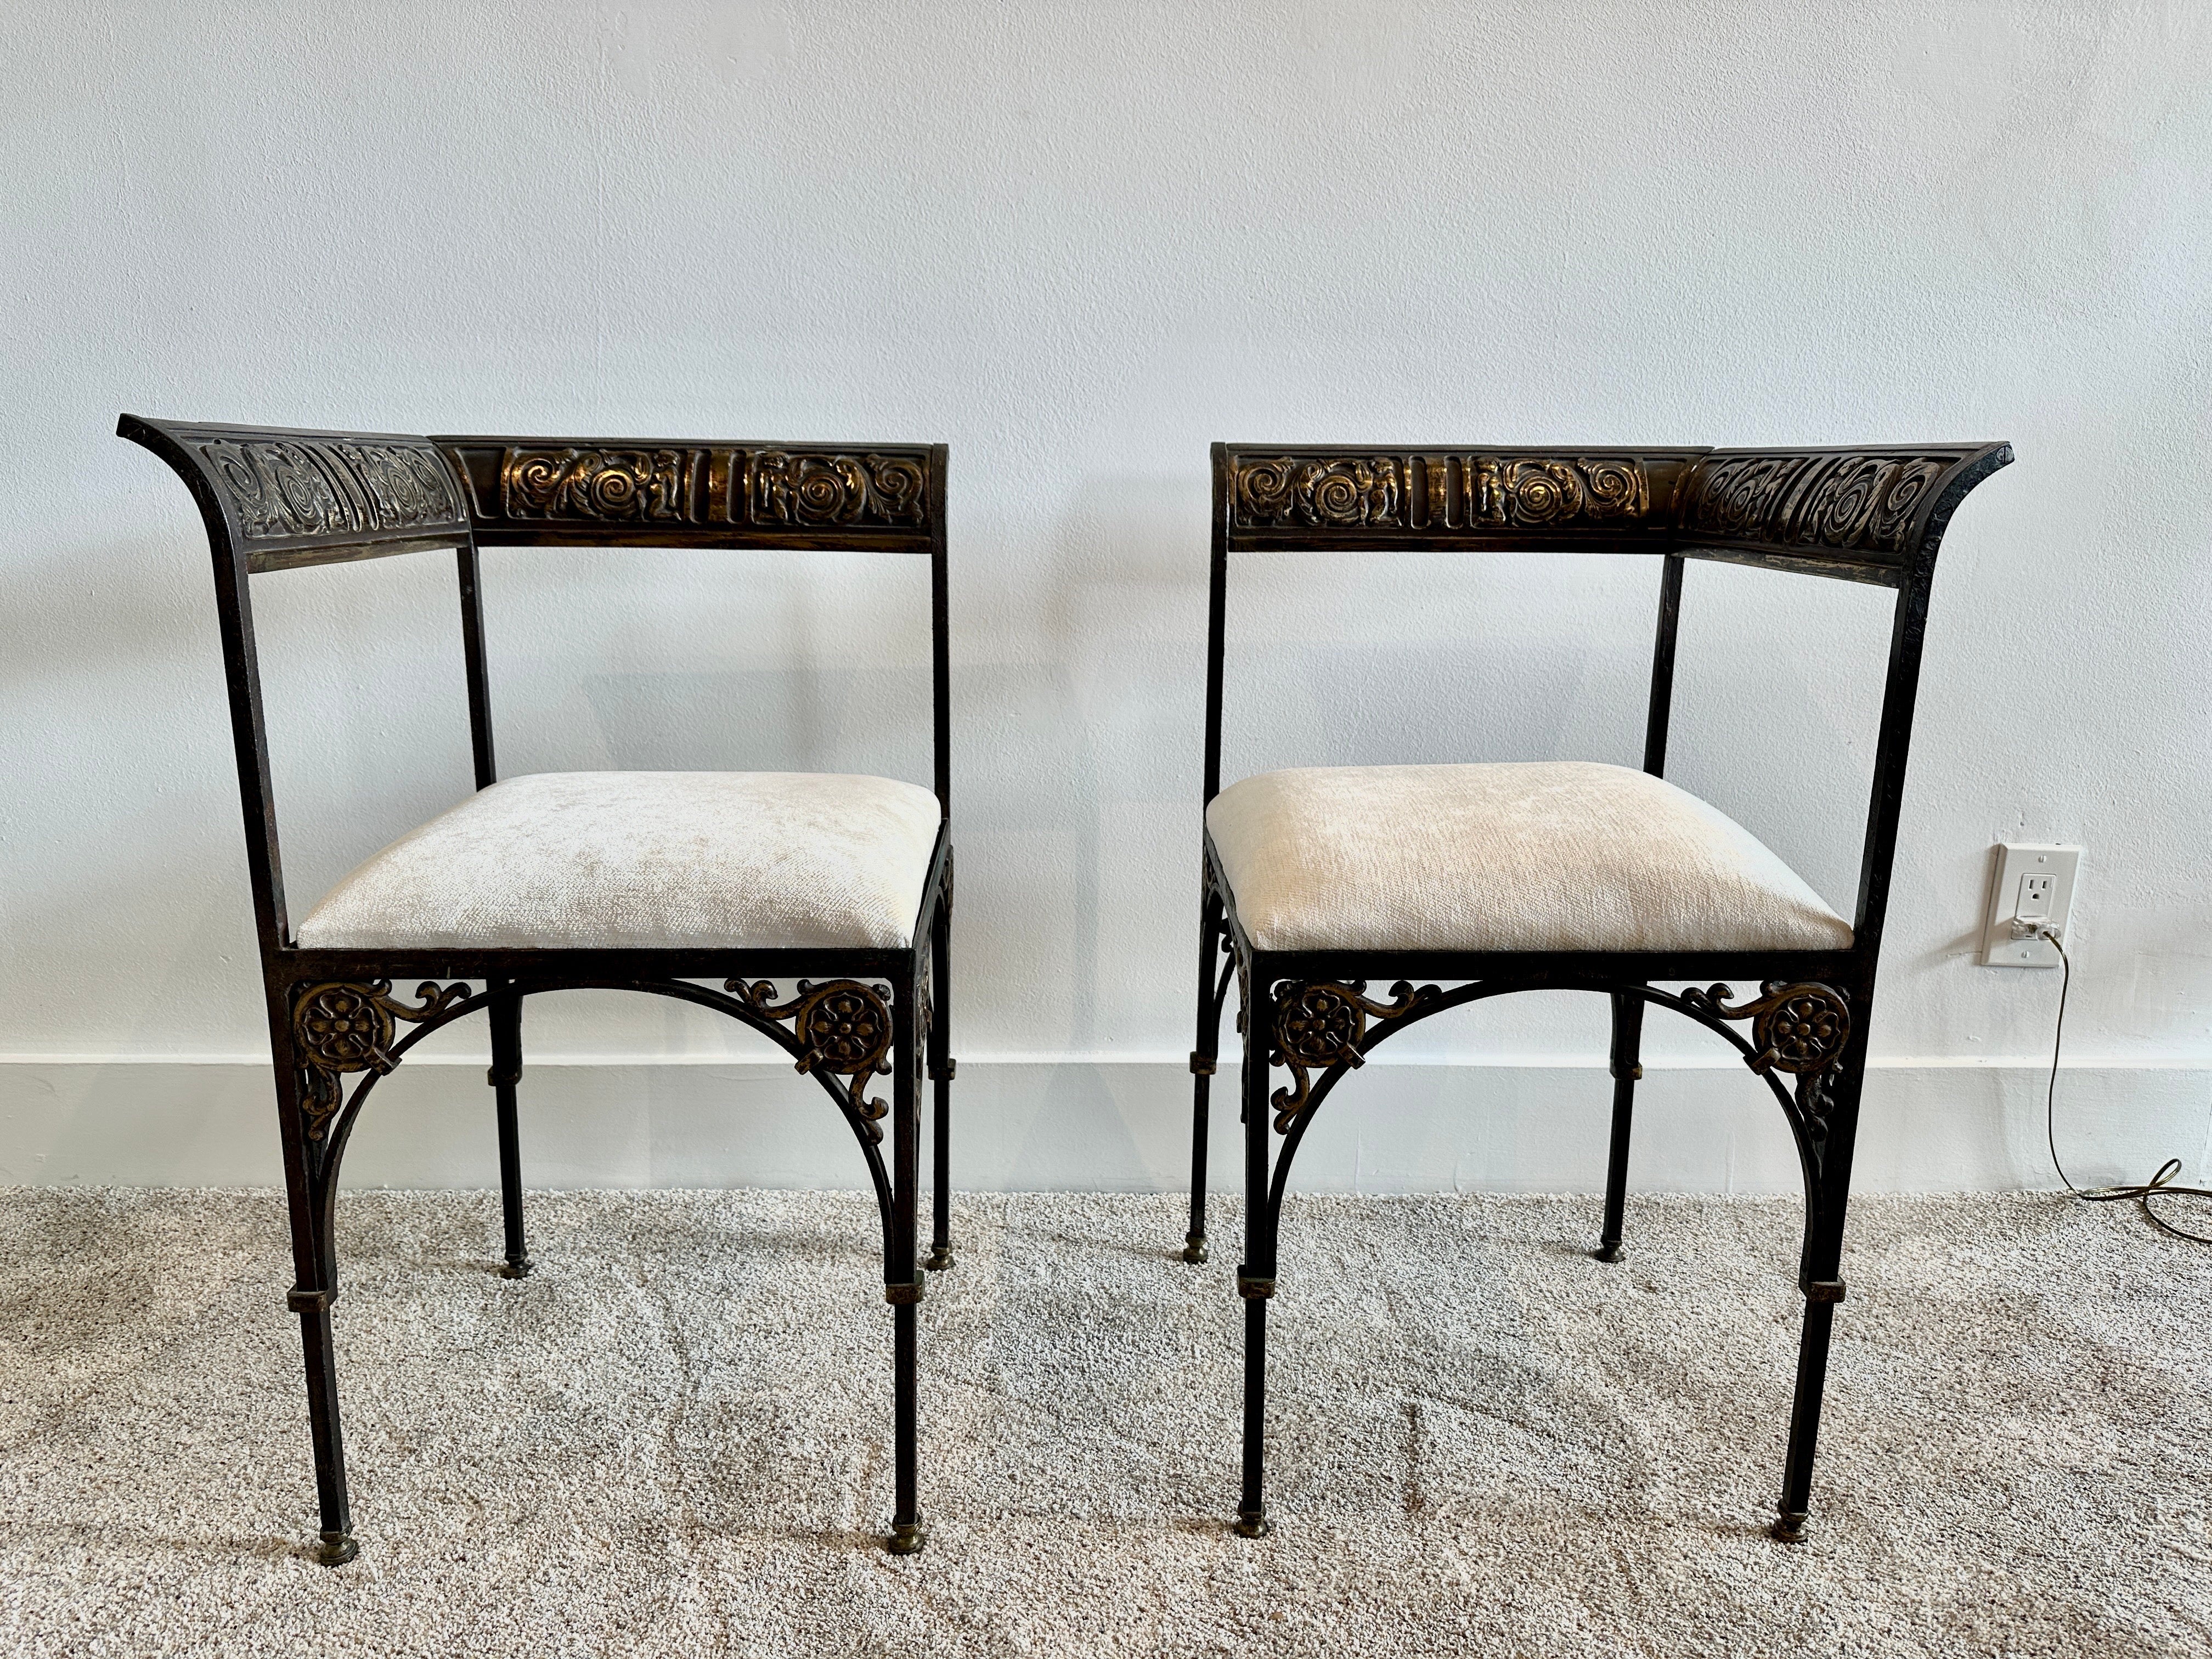 Oscar Bruno Bach (German/American, 1884-1957) designed these lovely corner chairs in 1925 and yet, they have a timeless beauty and functionality. Beautiful bronze work to backrest and legs, along with wrought iron legs and structure. Original finish